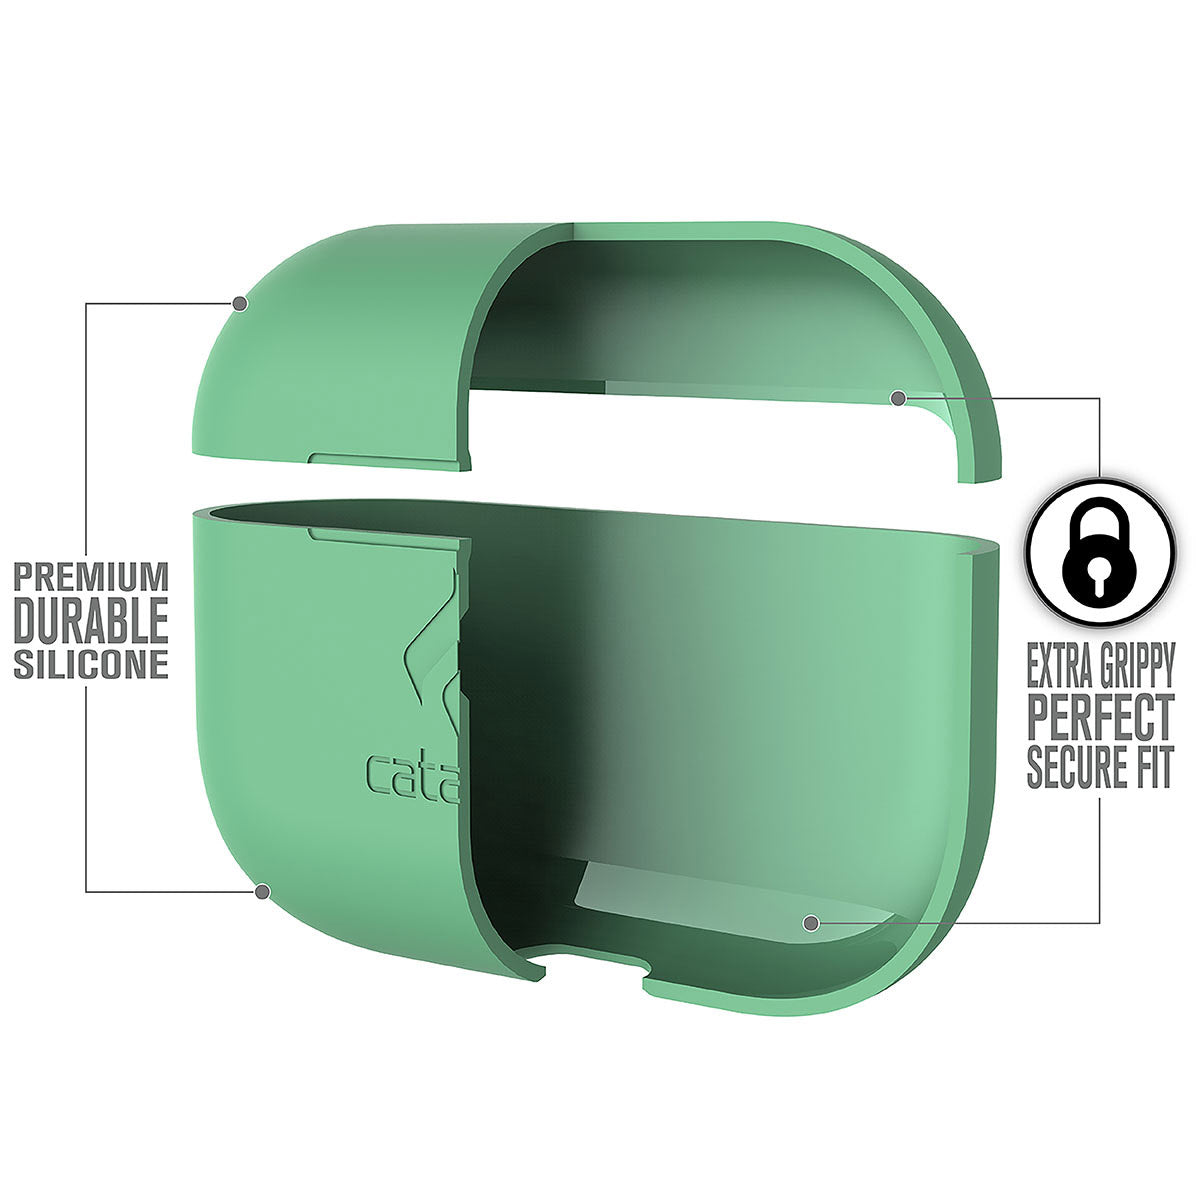 Catalyst airpods pro gen 2/1 slim case showing the case features in a mint green colorway text reads premium durable silicone extra grippy perfect secure fit